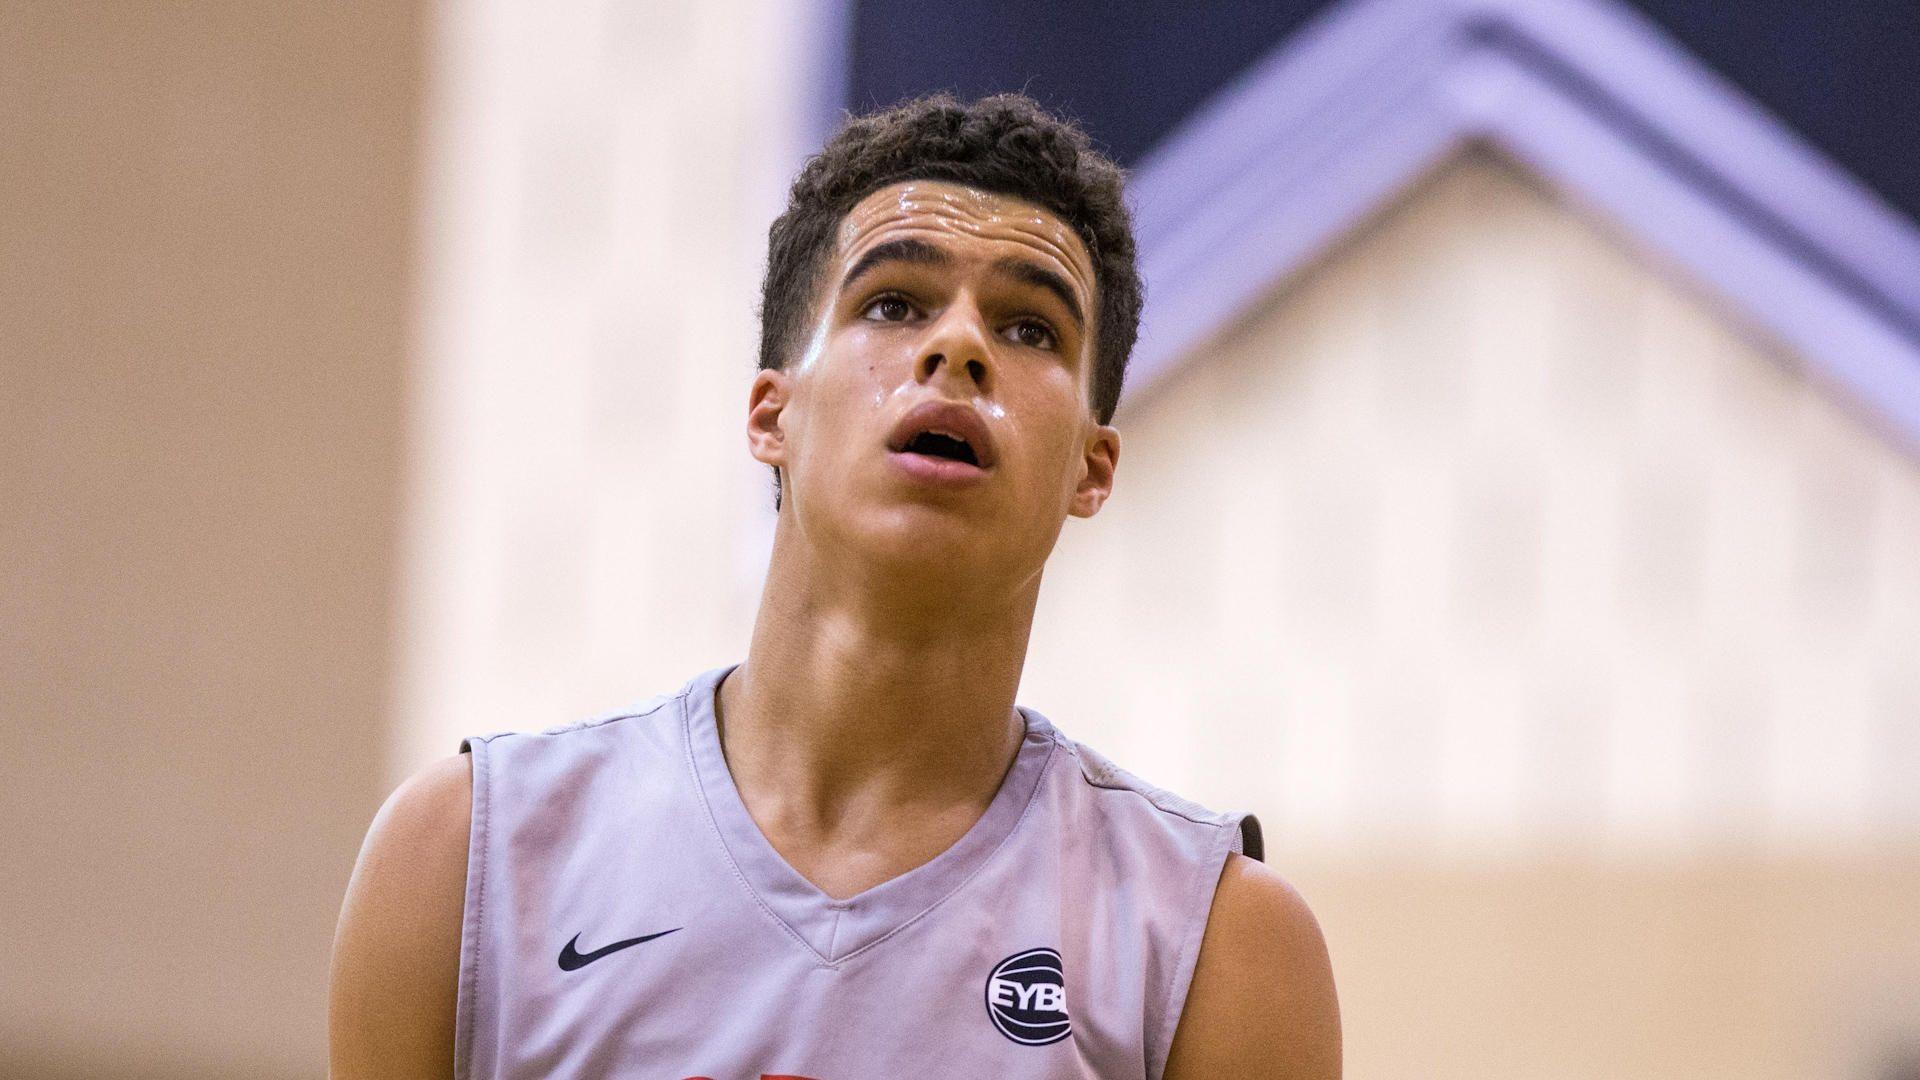 Where will No. 2 recruit Michael Porter Jr. land after release